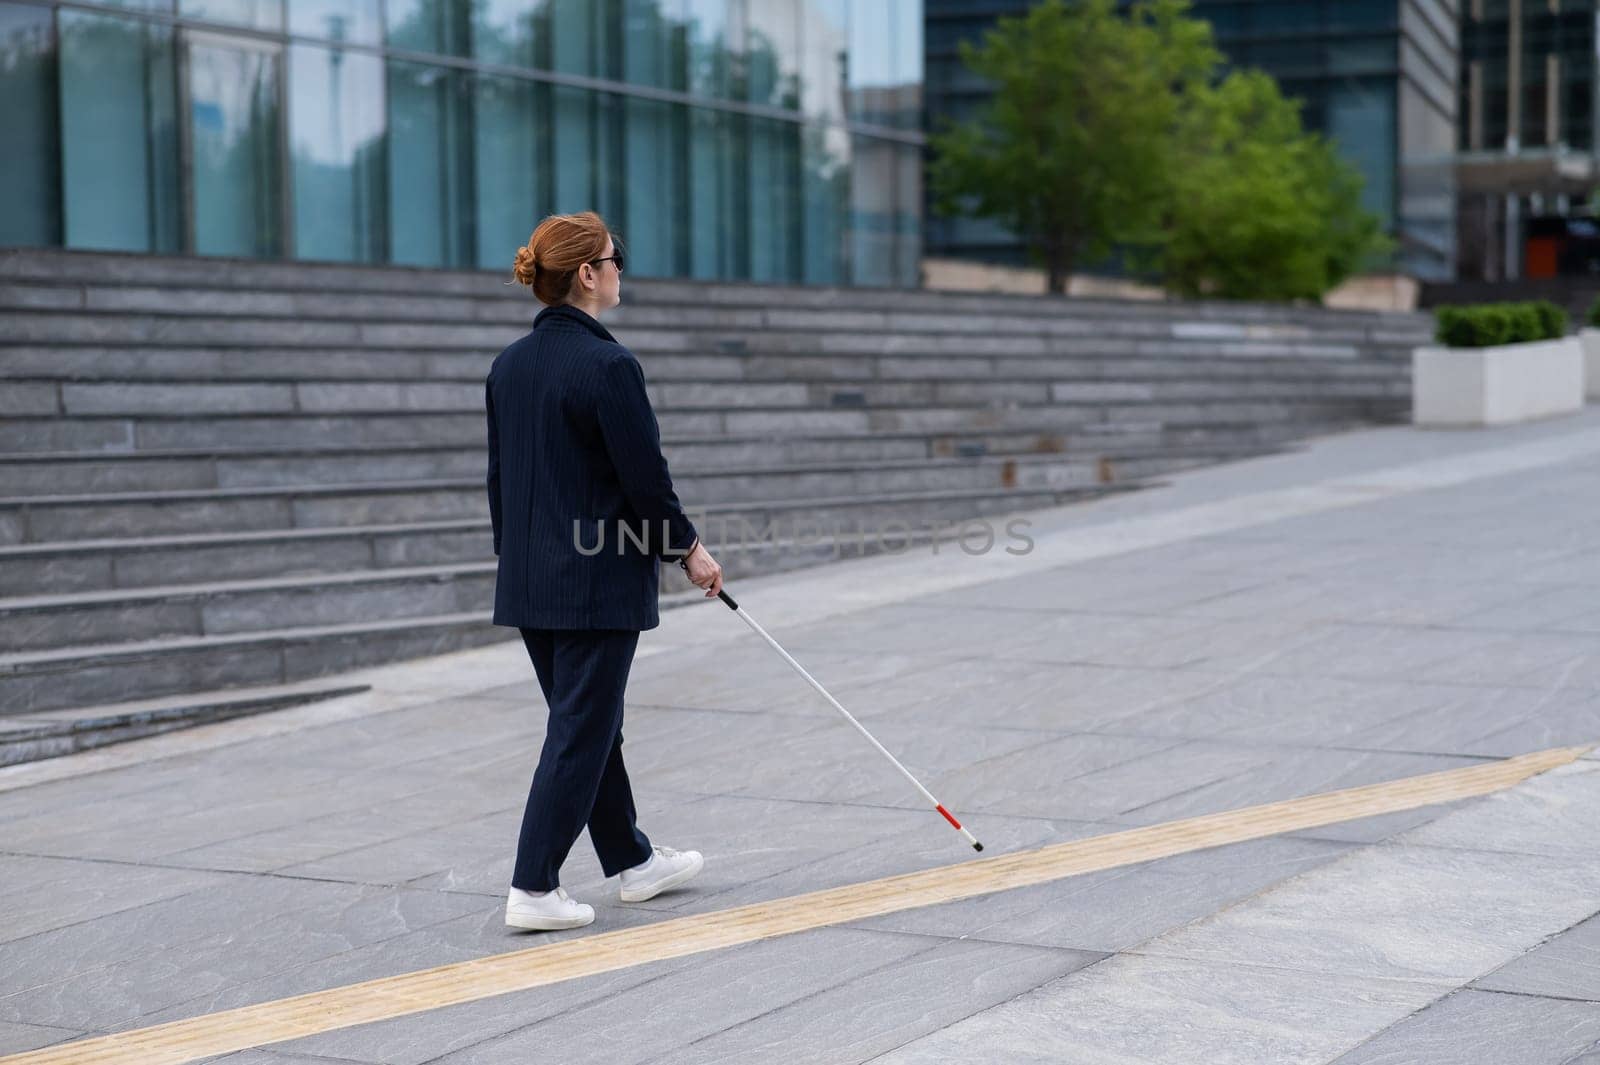 Blind businesswoman walking along tactile tiles with a cane